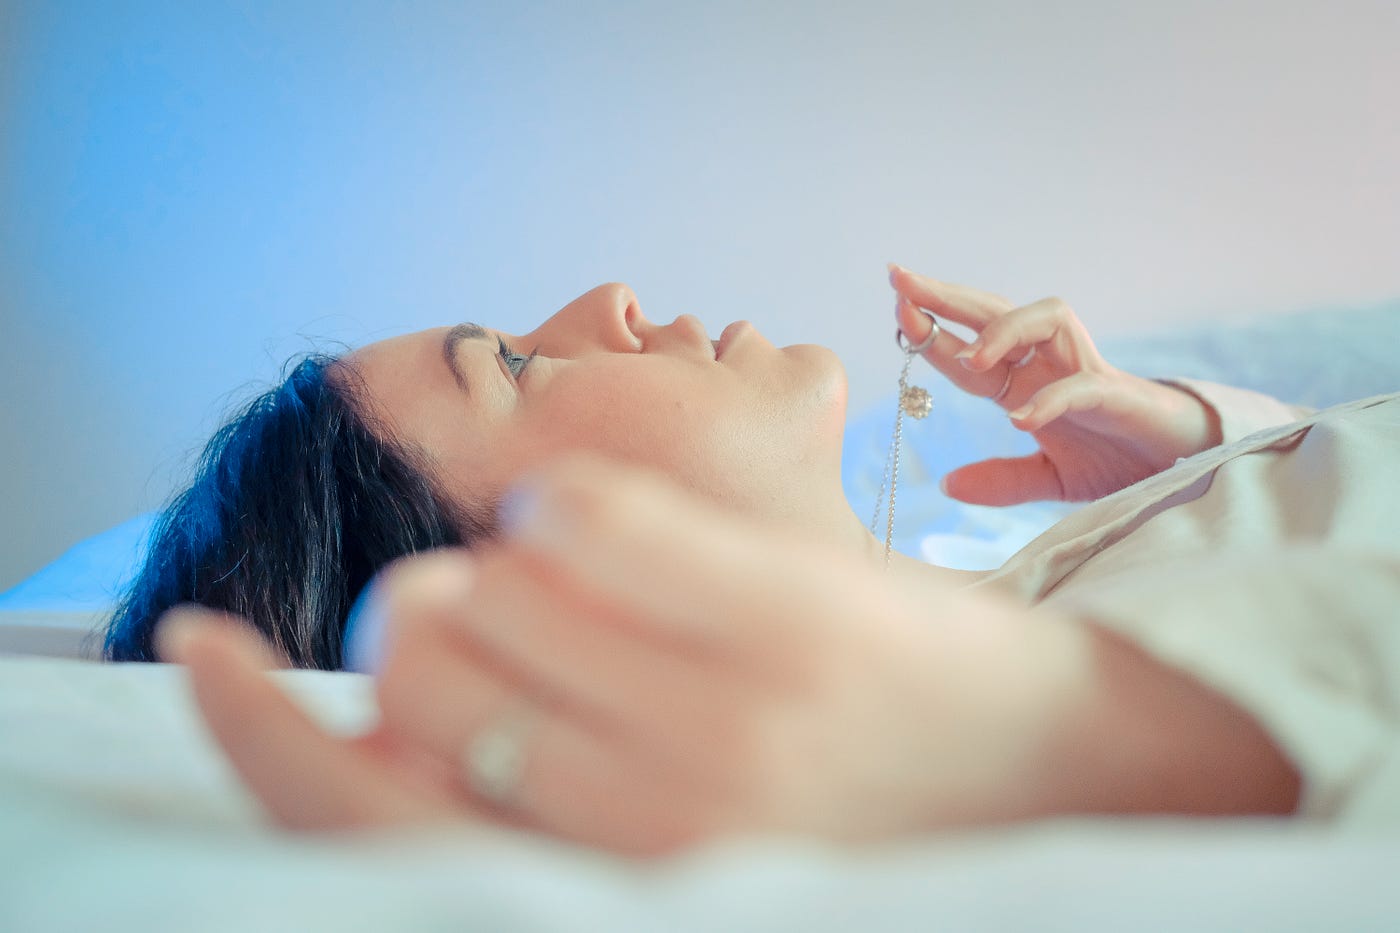 A young woman lies with her head to the left, her arms raised to ear level. She appears to be nearly floating on a bed as she gases upward. Lack of sleep or poor sleep quality can lead to various health issues, including increased risk of chronic diseases, impaired cognitive function, weakened immune system, and compromised emotional well-being.